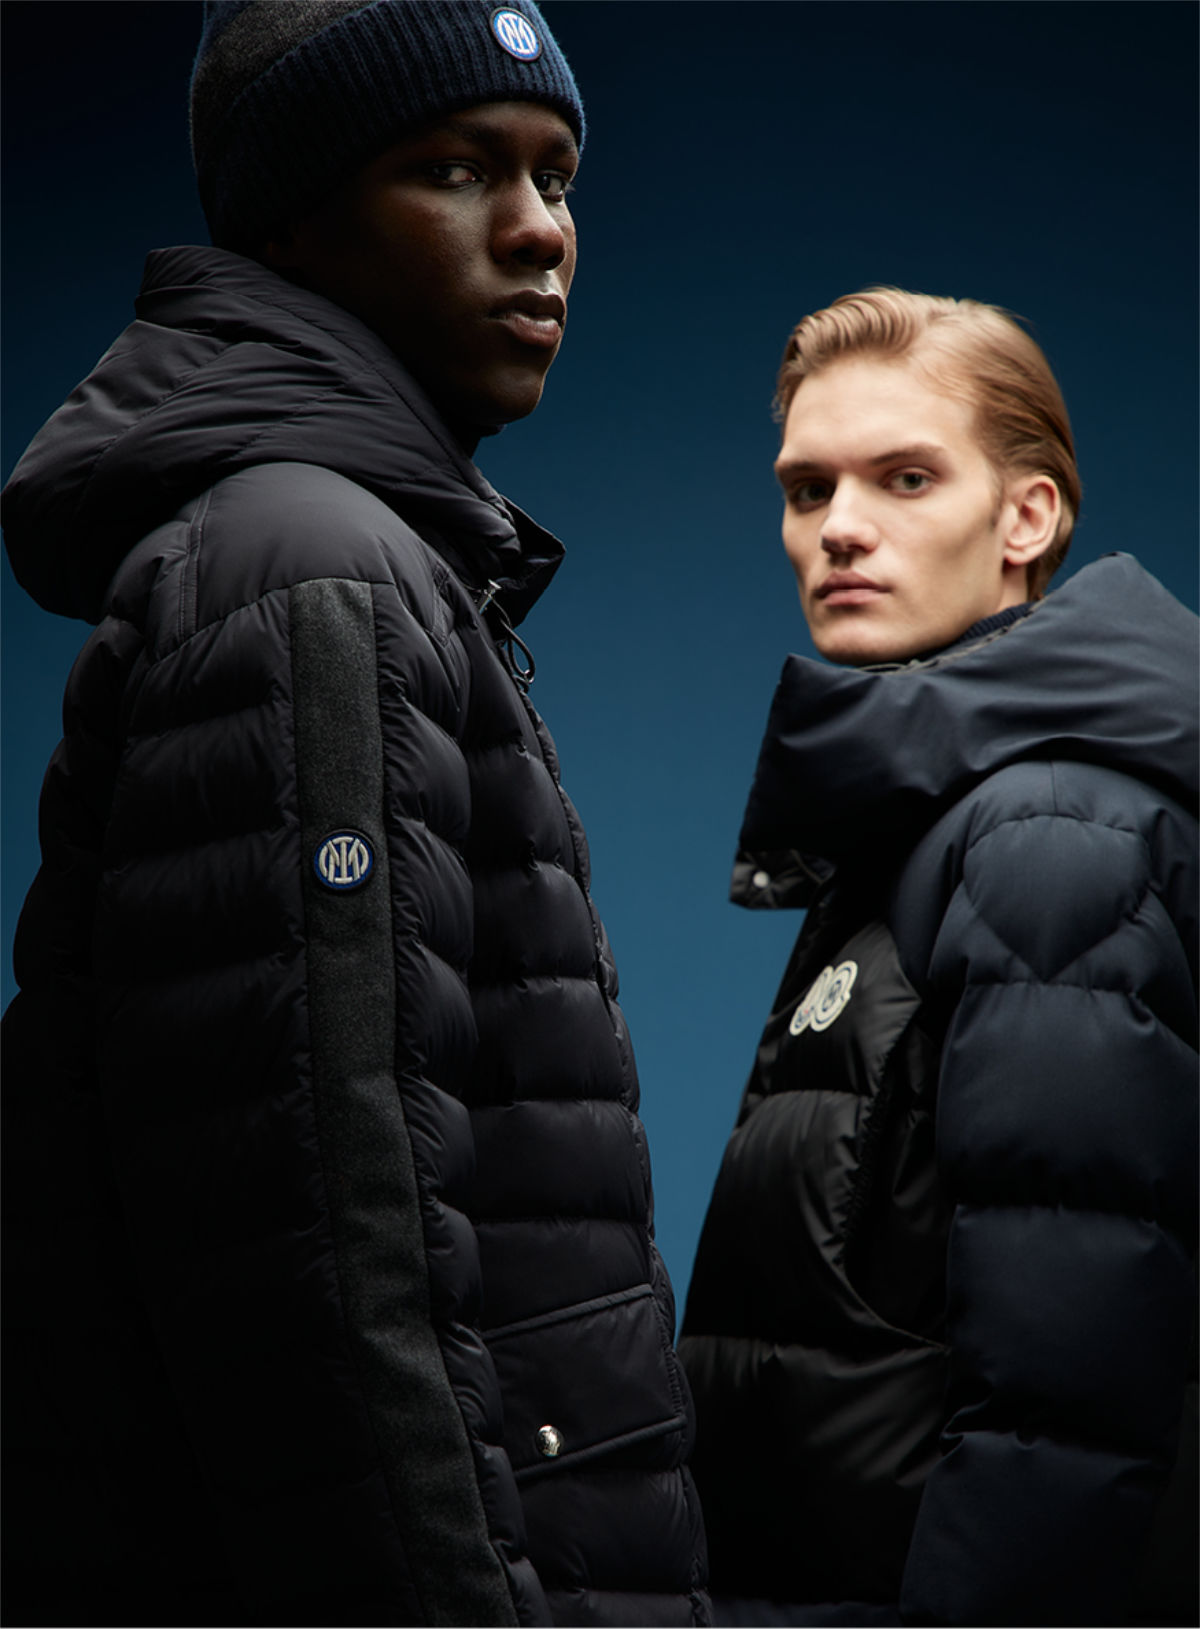 Inter And Moncler Team Up To Celebrate The Brand’s 70th Anniversary